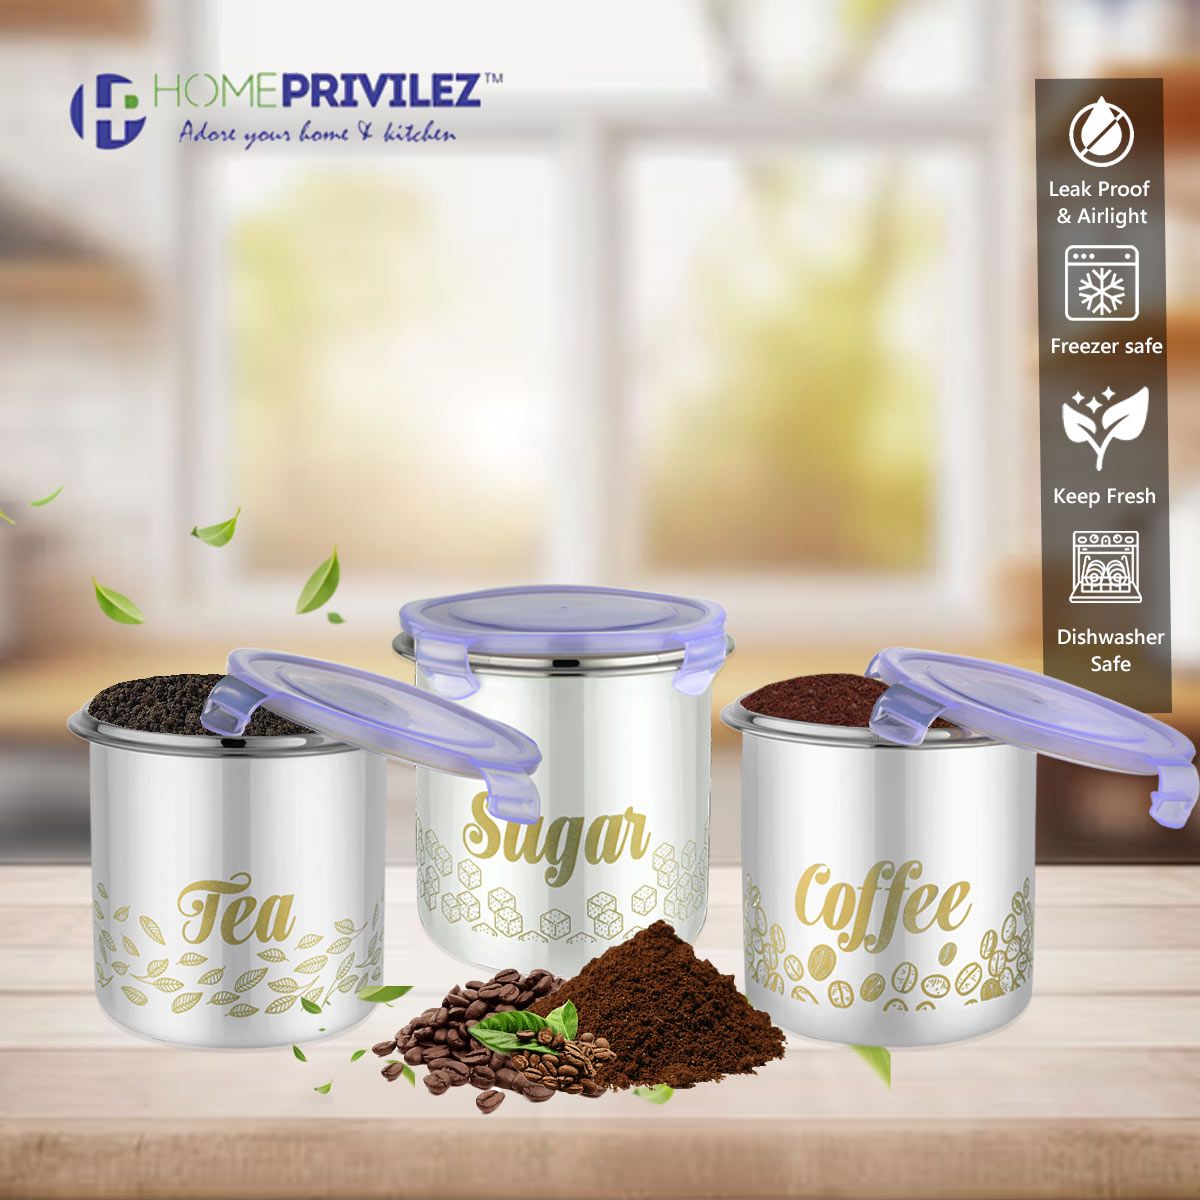 “Flip & Seal “Stainless Steel Air Tight Storage Container- Tea, Coffee & Sugar Set of 3 in white colour(1350mLx3)